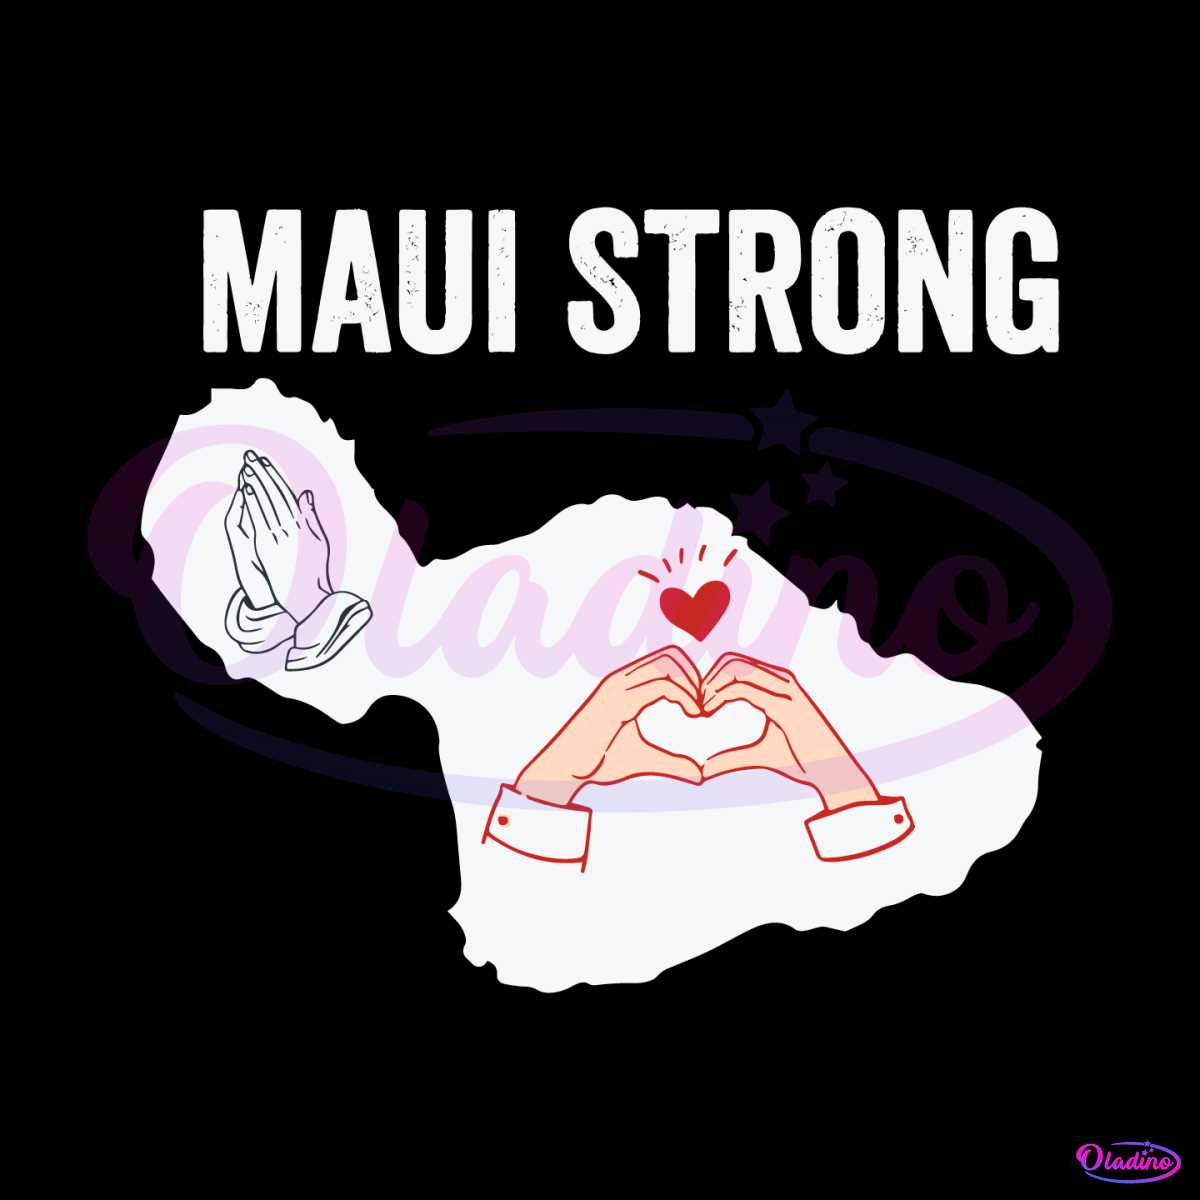 maui-strong-svg-pray-for-maui-victims-svg-download